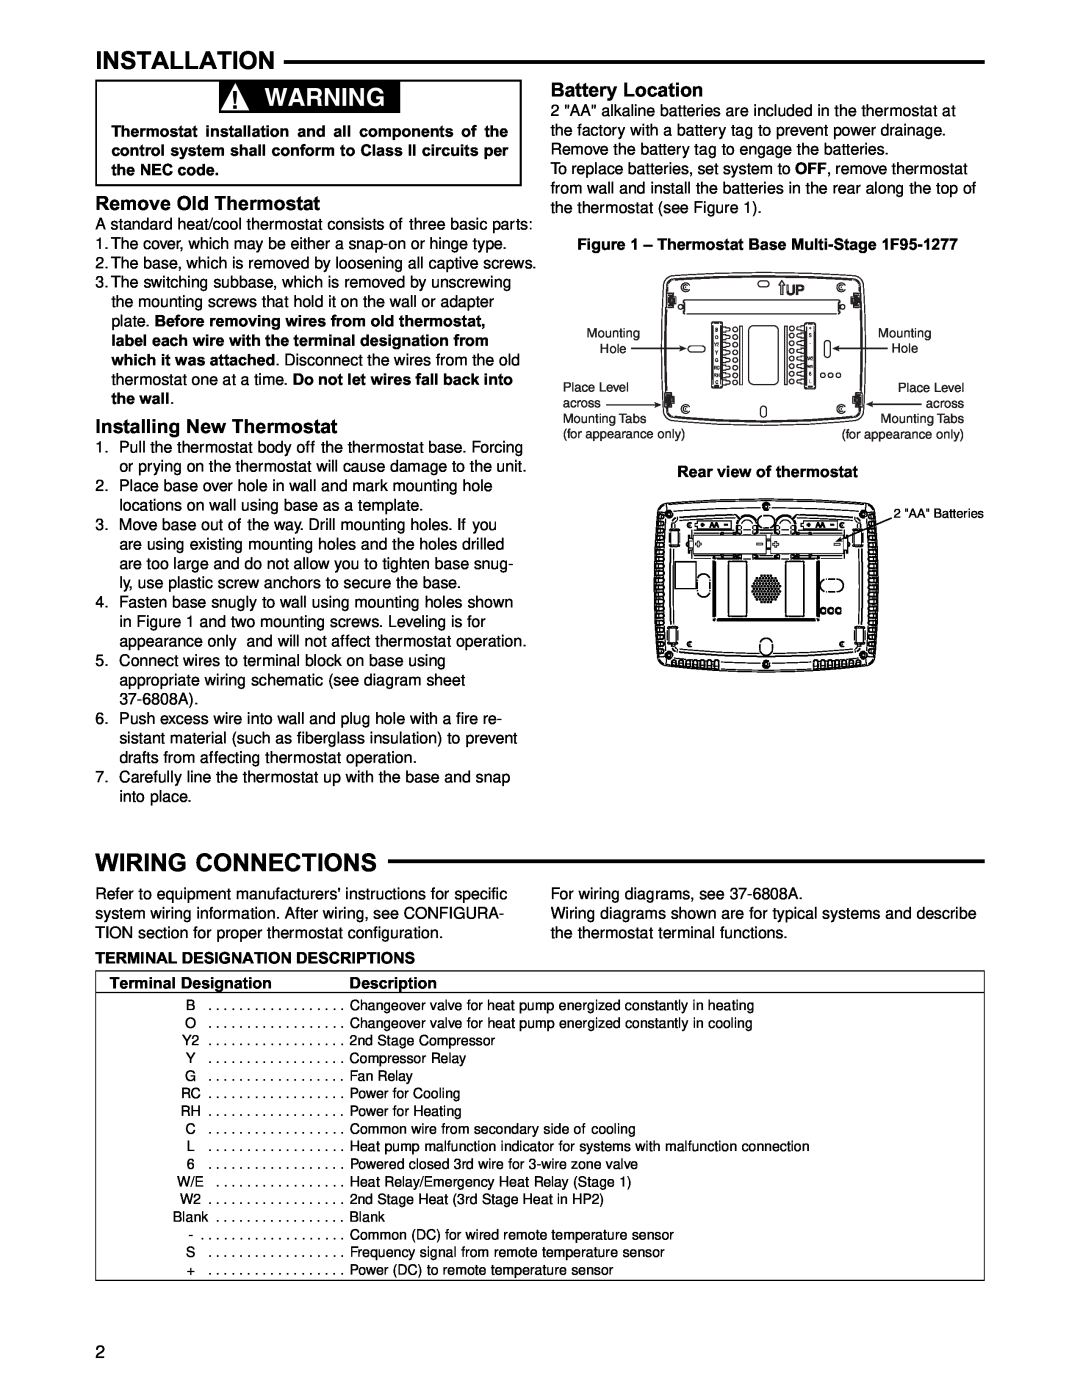 White Rodgers 1F95-1277 specifications Installation, Wiring Connections, Remove Old Thermostat, Installing New Thermostat 